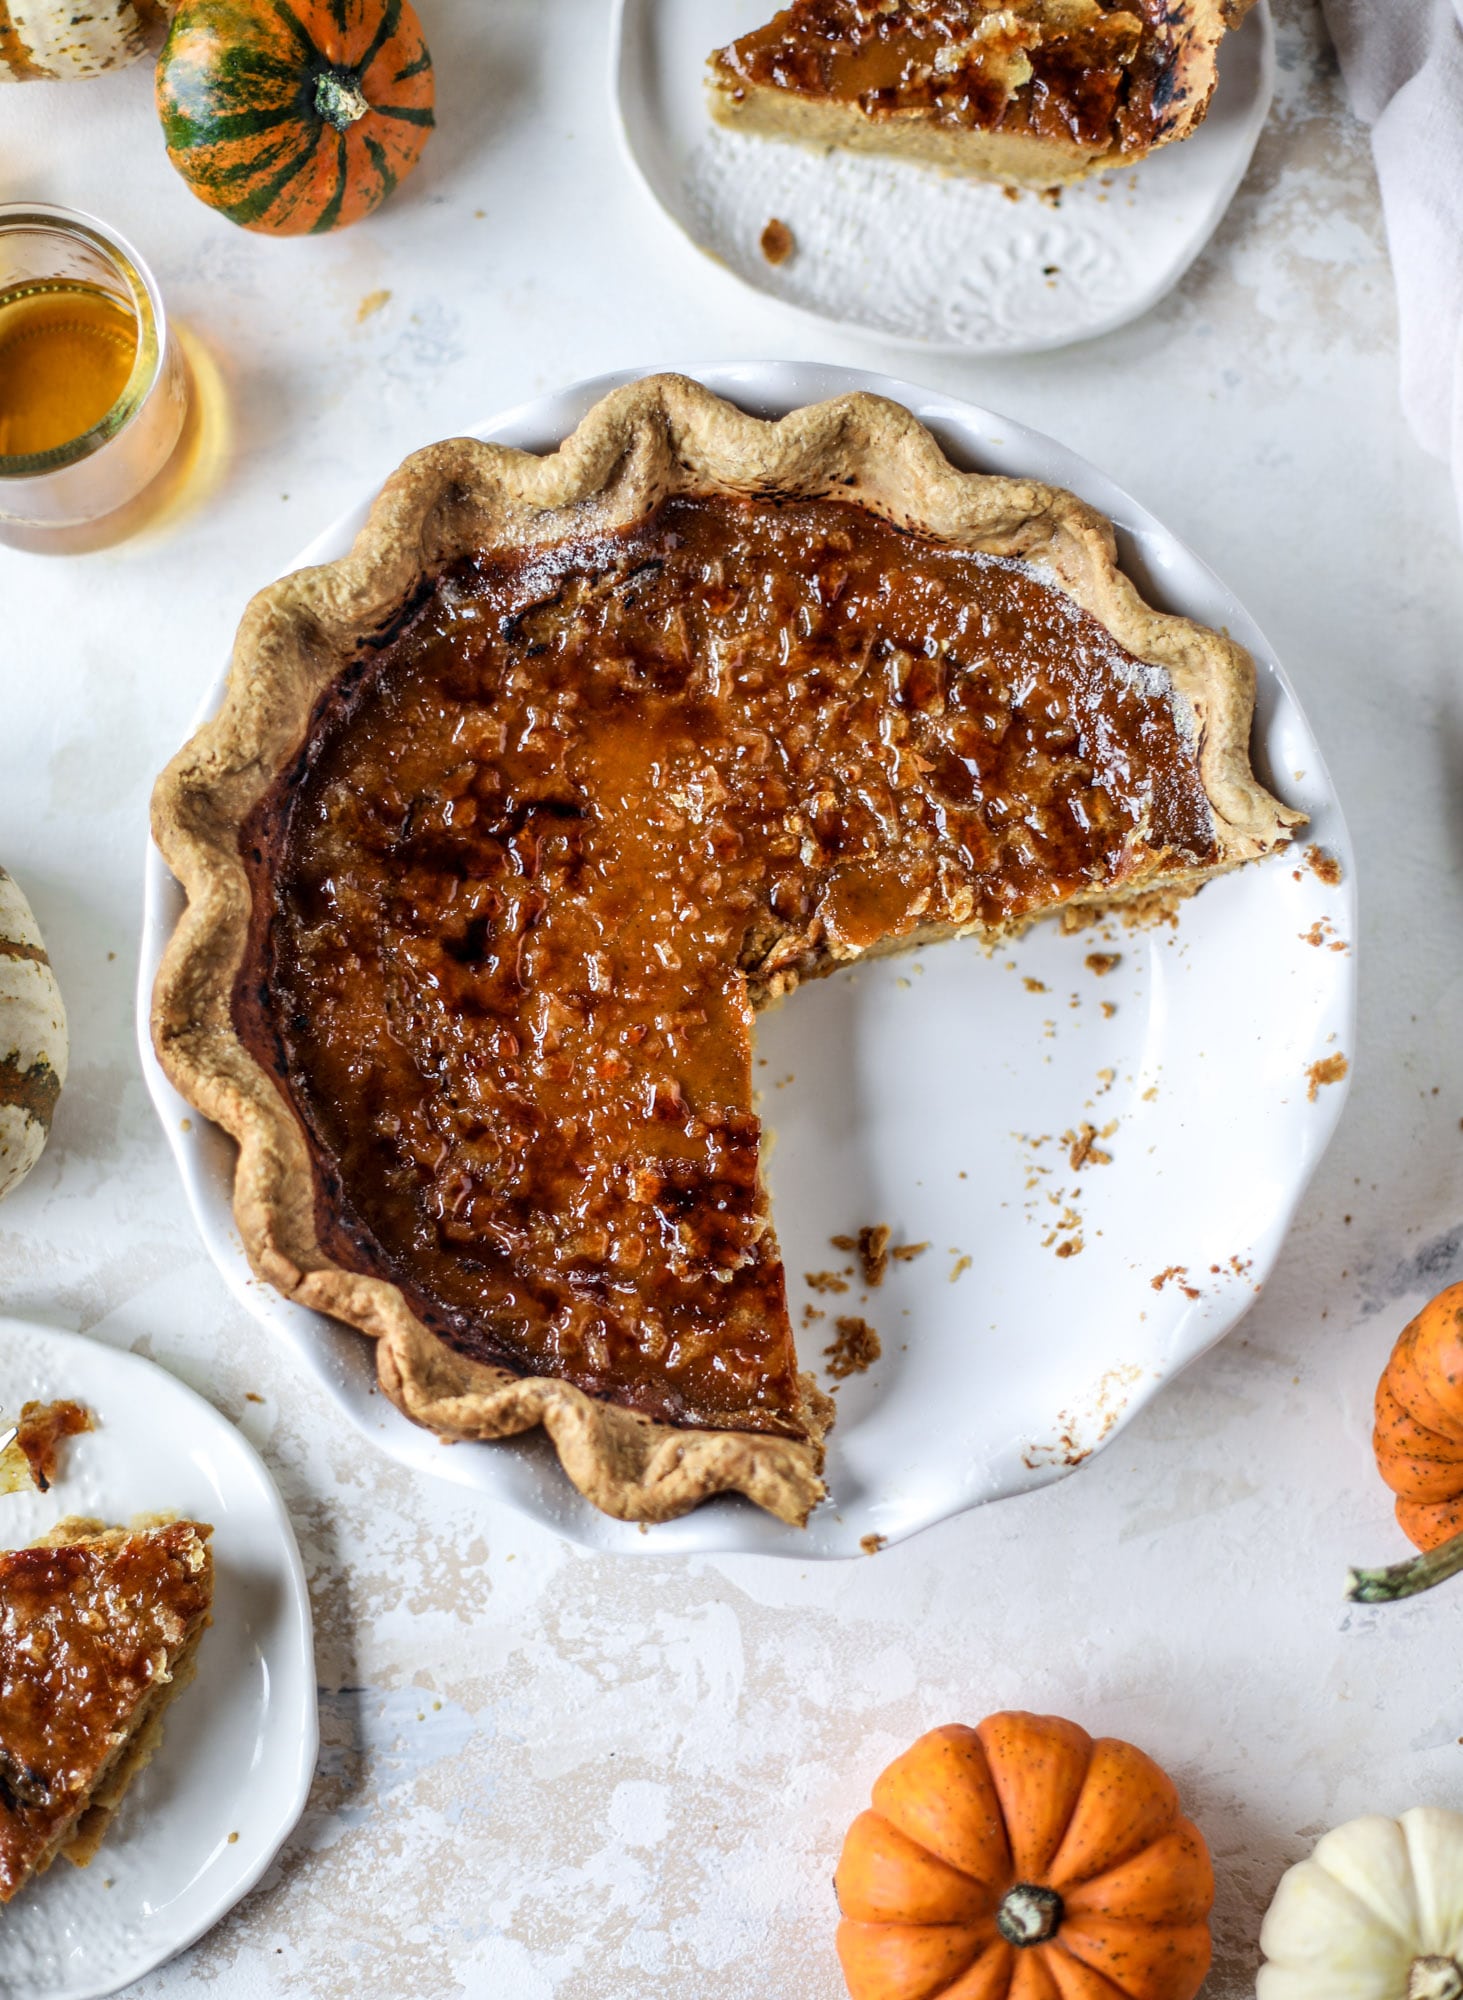 This brûlée pumpkin pie is the best of both worlds in pumpkin desserts! A delicious flaky crust, a creamy pumpkin filling and a crunchy, crispy topping - brûléed sugar right before serving. It's a whole new way to serve pumpkin pie! I howsweeteats.com #pumpkinpie #brulee